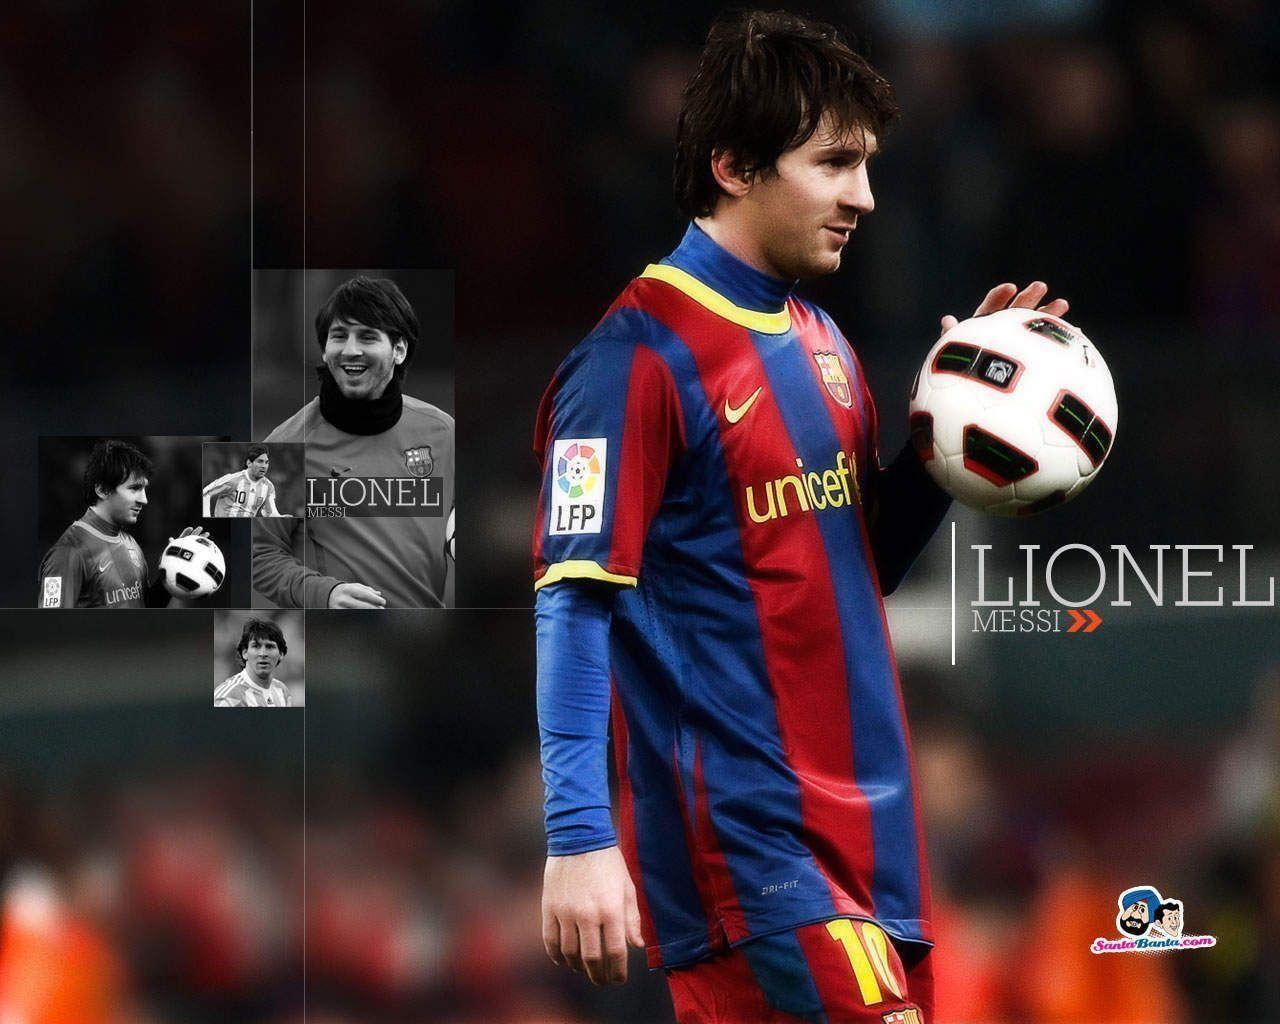 Wallpaper For > Messi Wallpaper HD And 3D